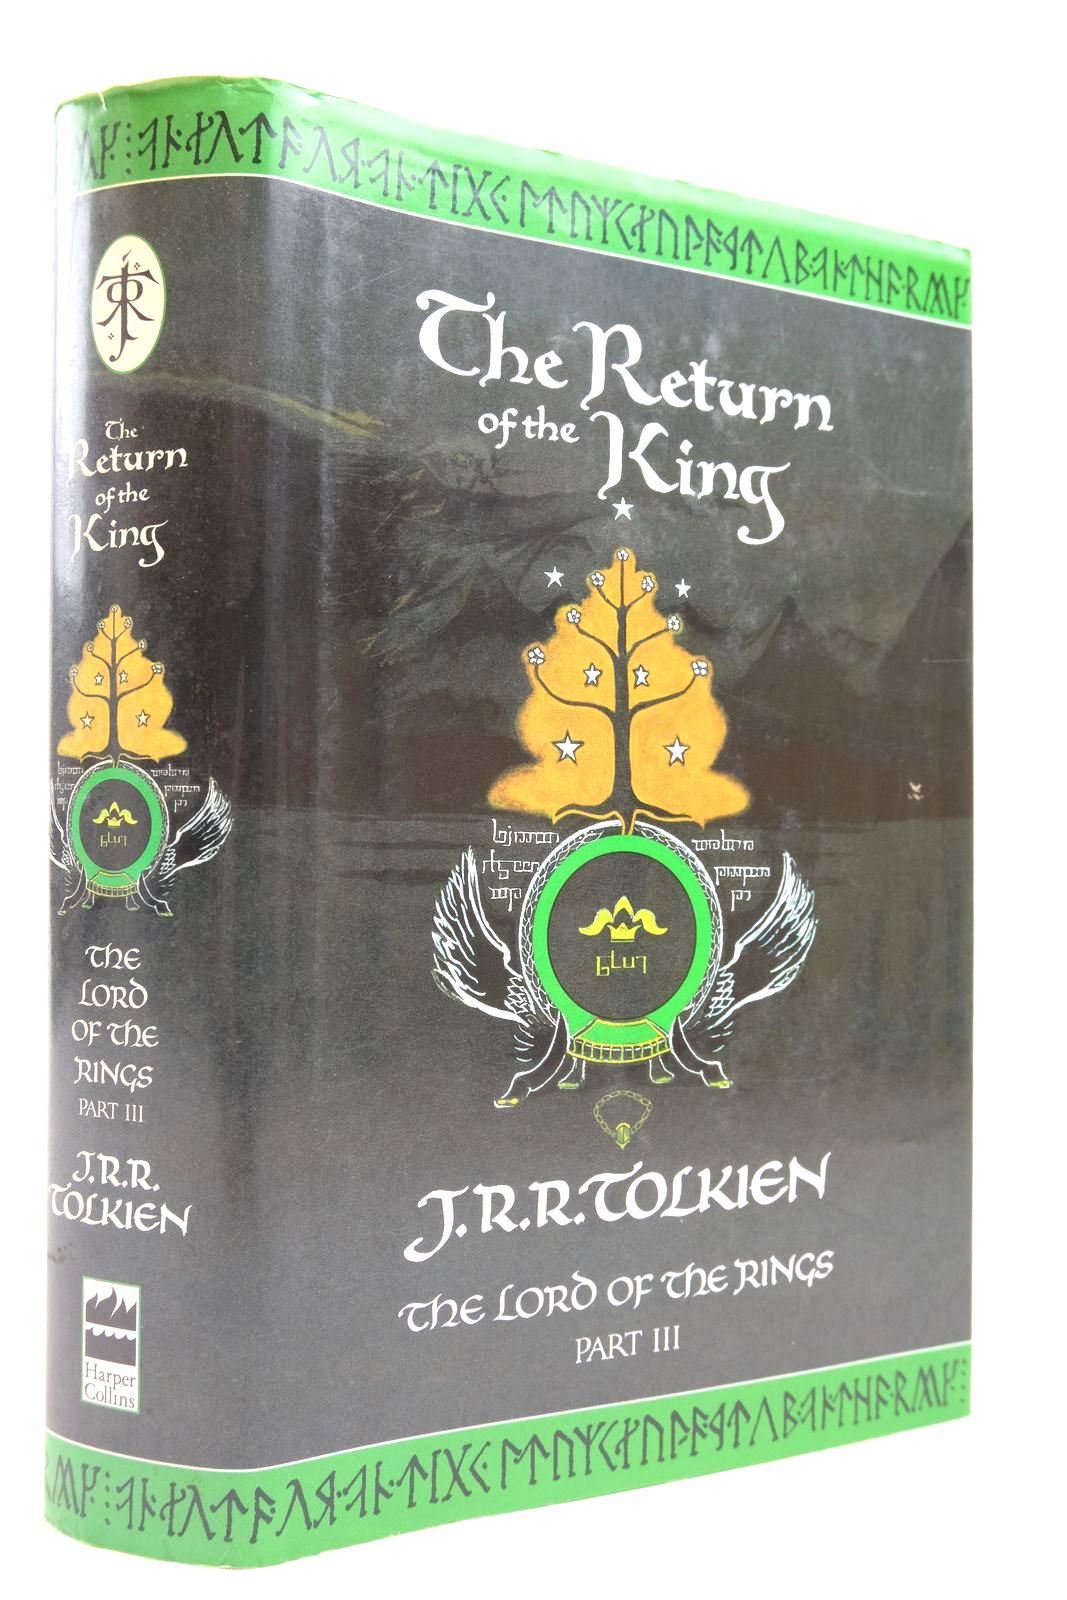 Photo of THE RETURN OF THE KING written by Tolkien, J.R.R. published by Harper Collins (STOCK CODE: 2140666)  for sale by Stella & Rose's Books